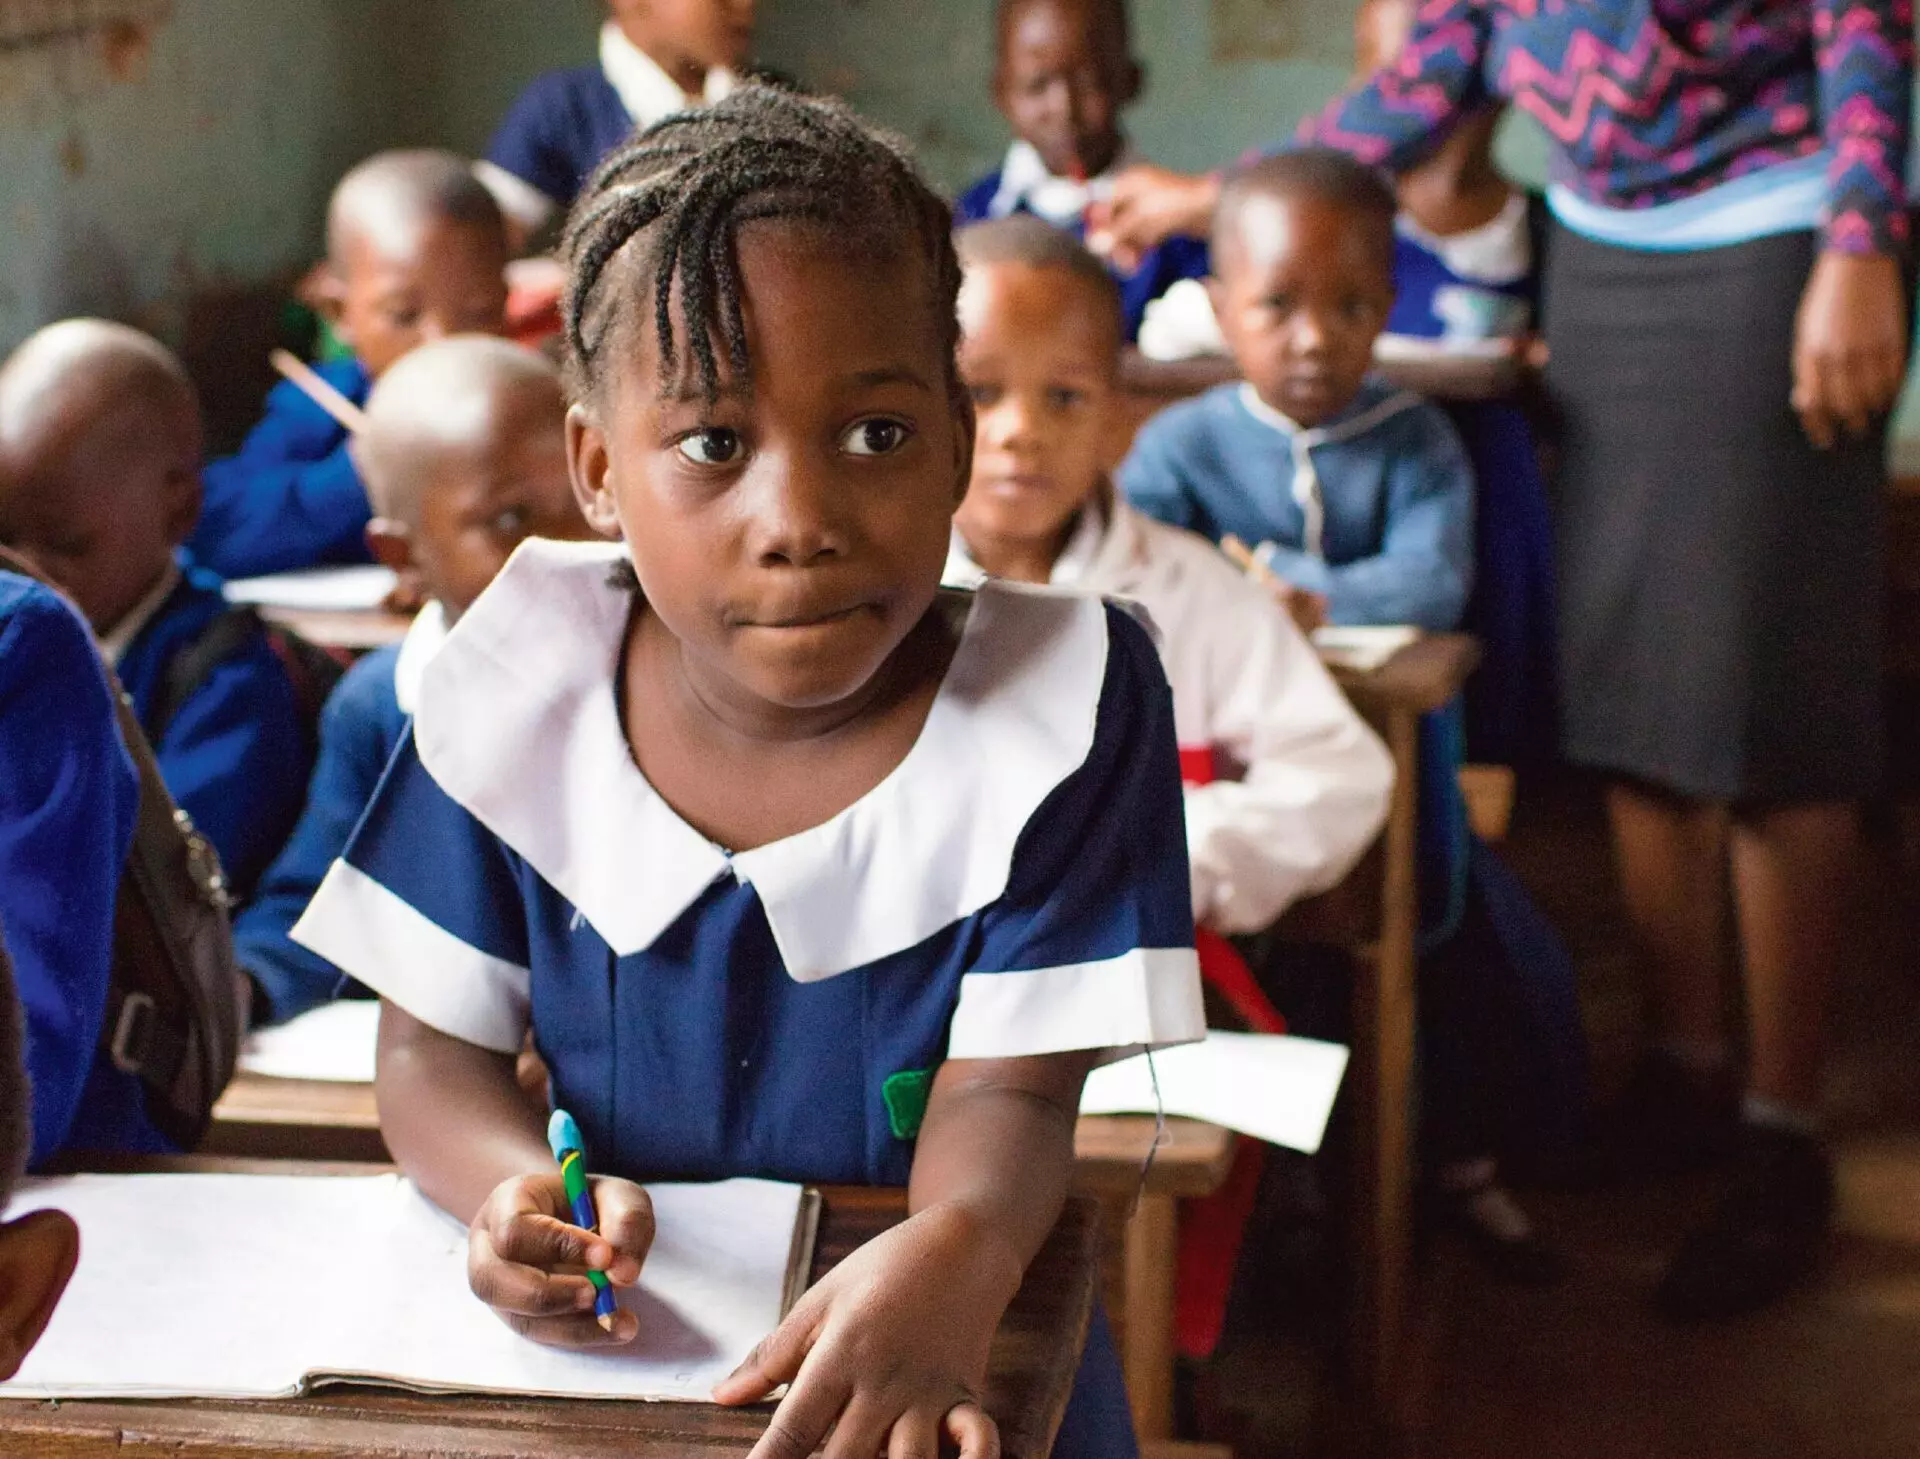 Young girl sits in a classroom at a desk writing with a pencil